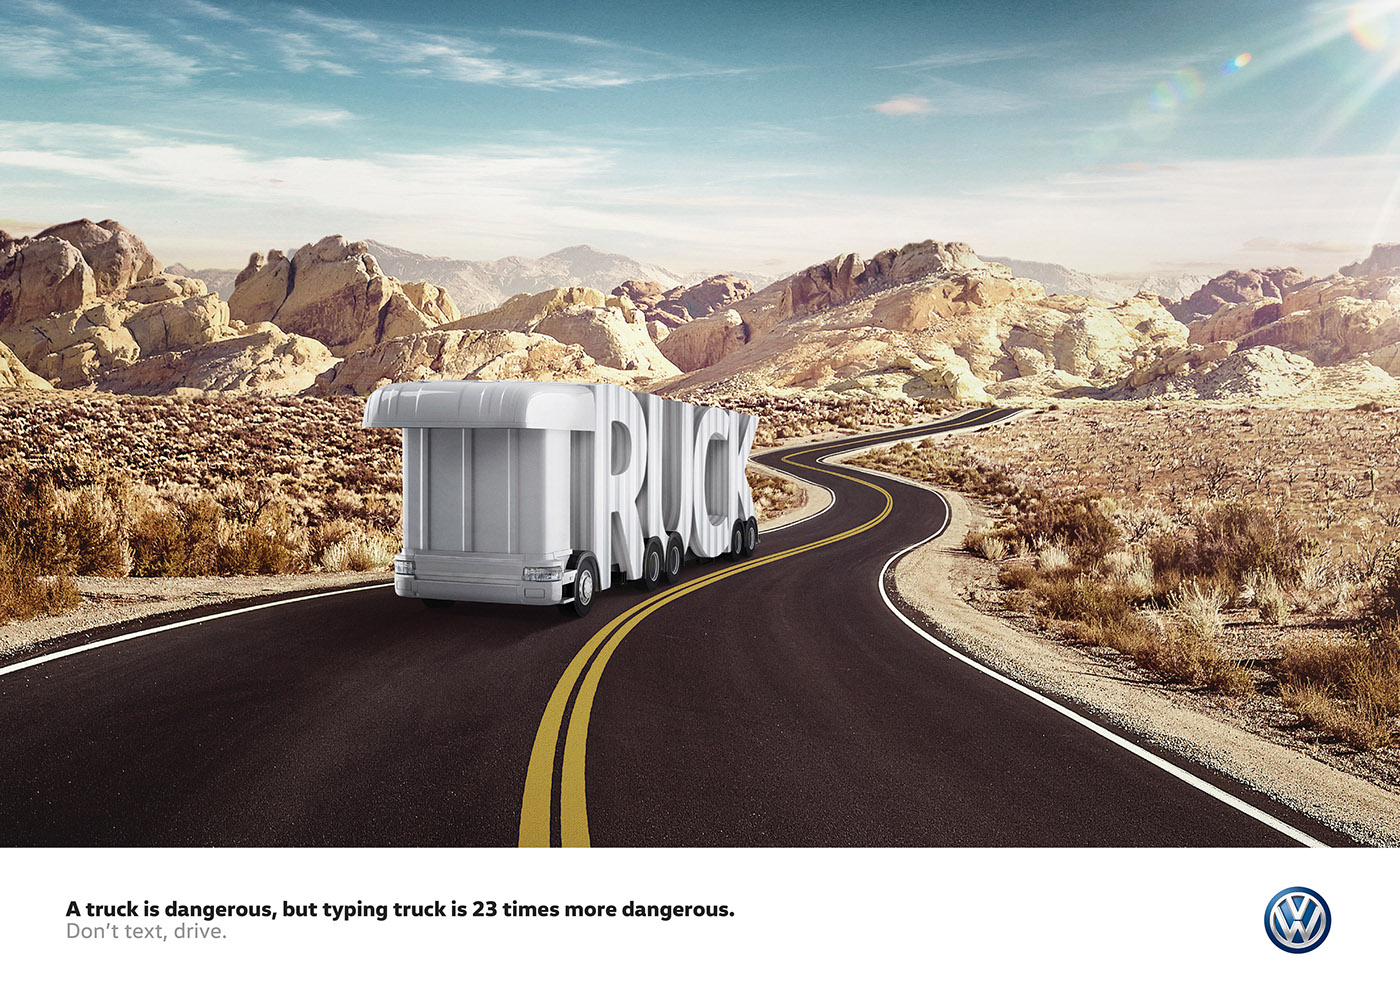 volkswagen dont text drive lettering type kill automotive   ad peru